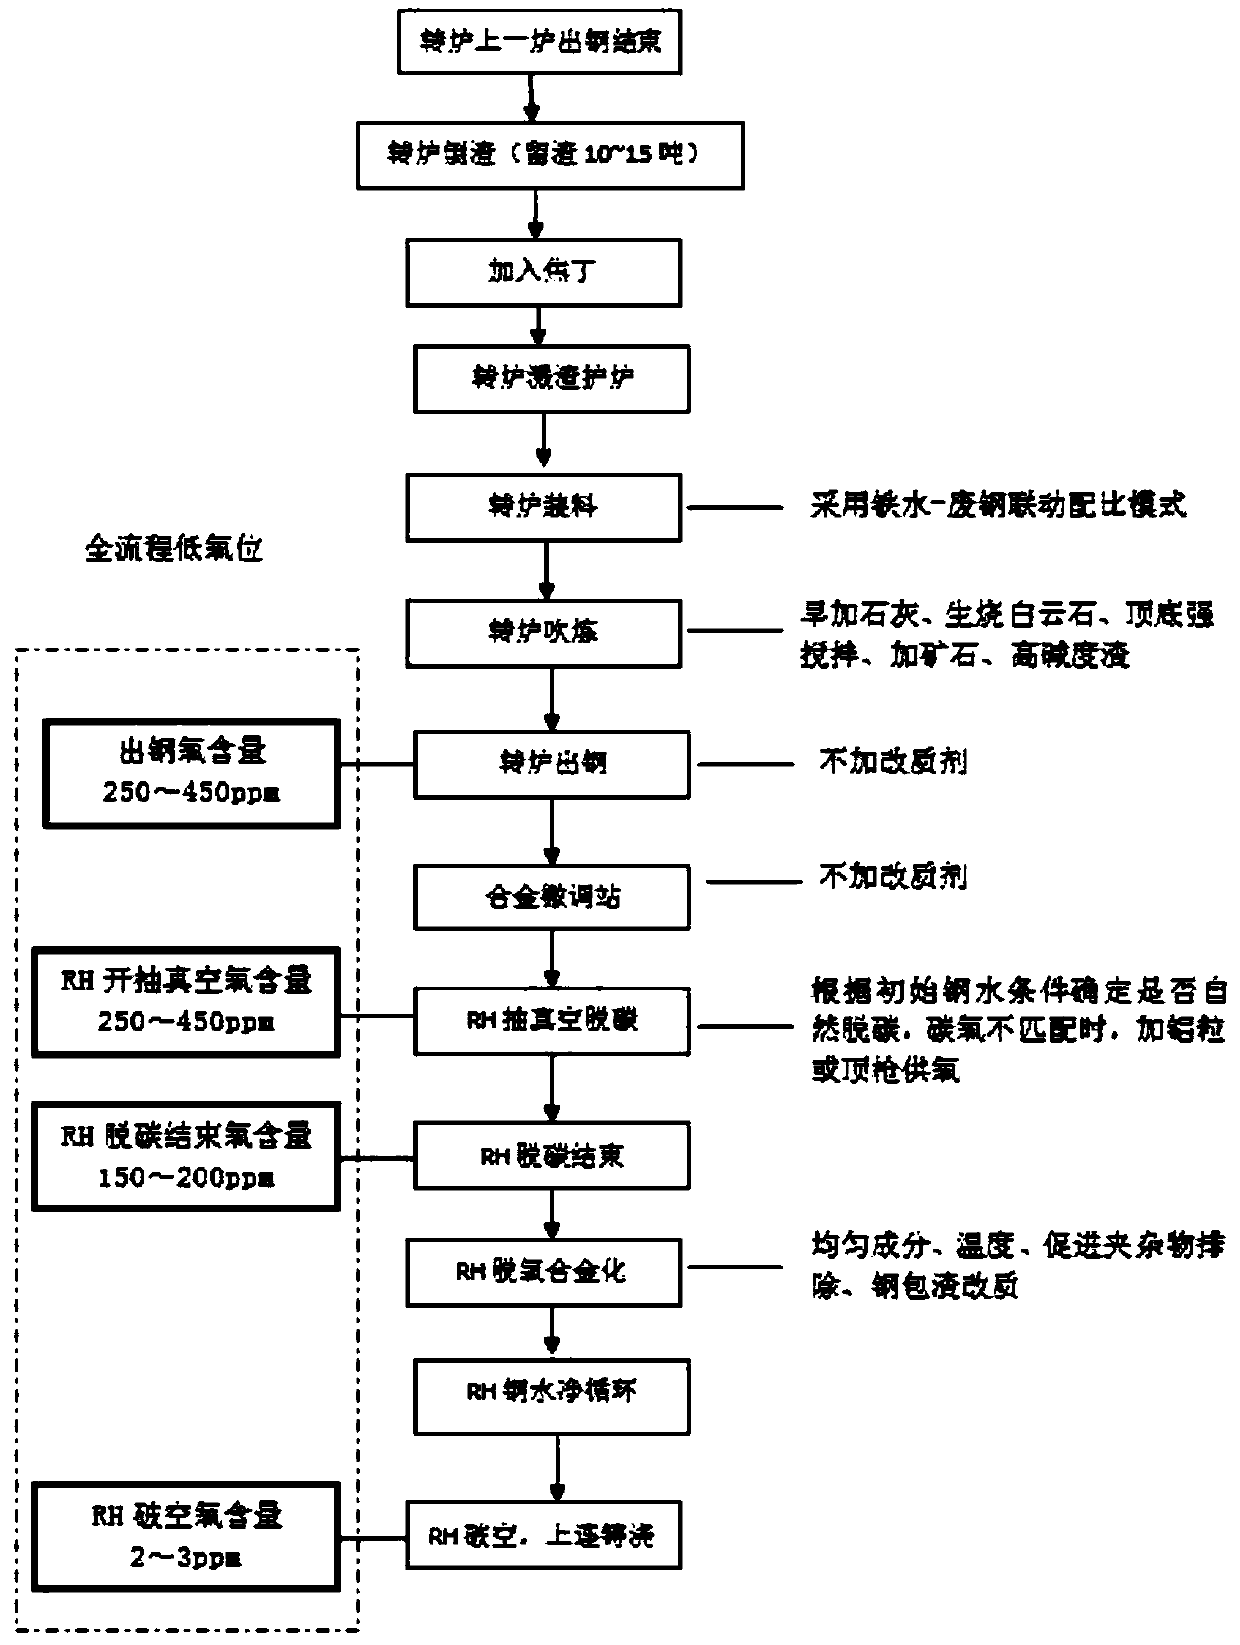 Smelting method for complete-flow low-oxygen-level producing of IF steel